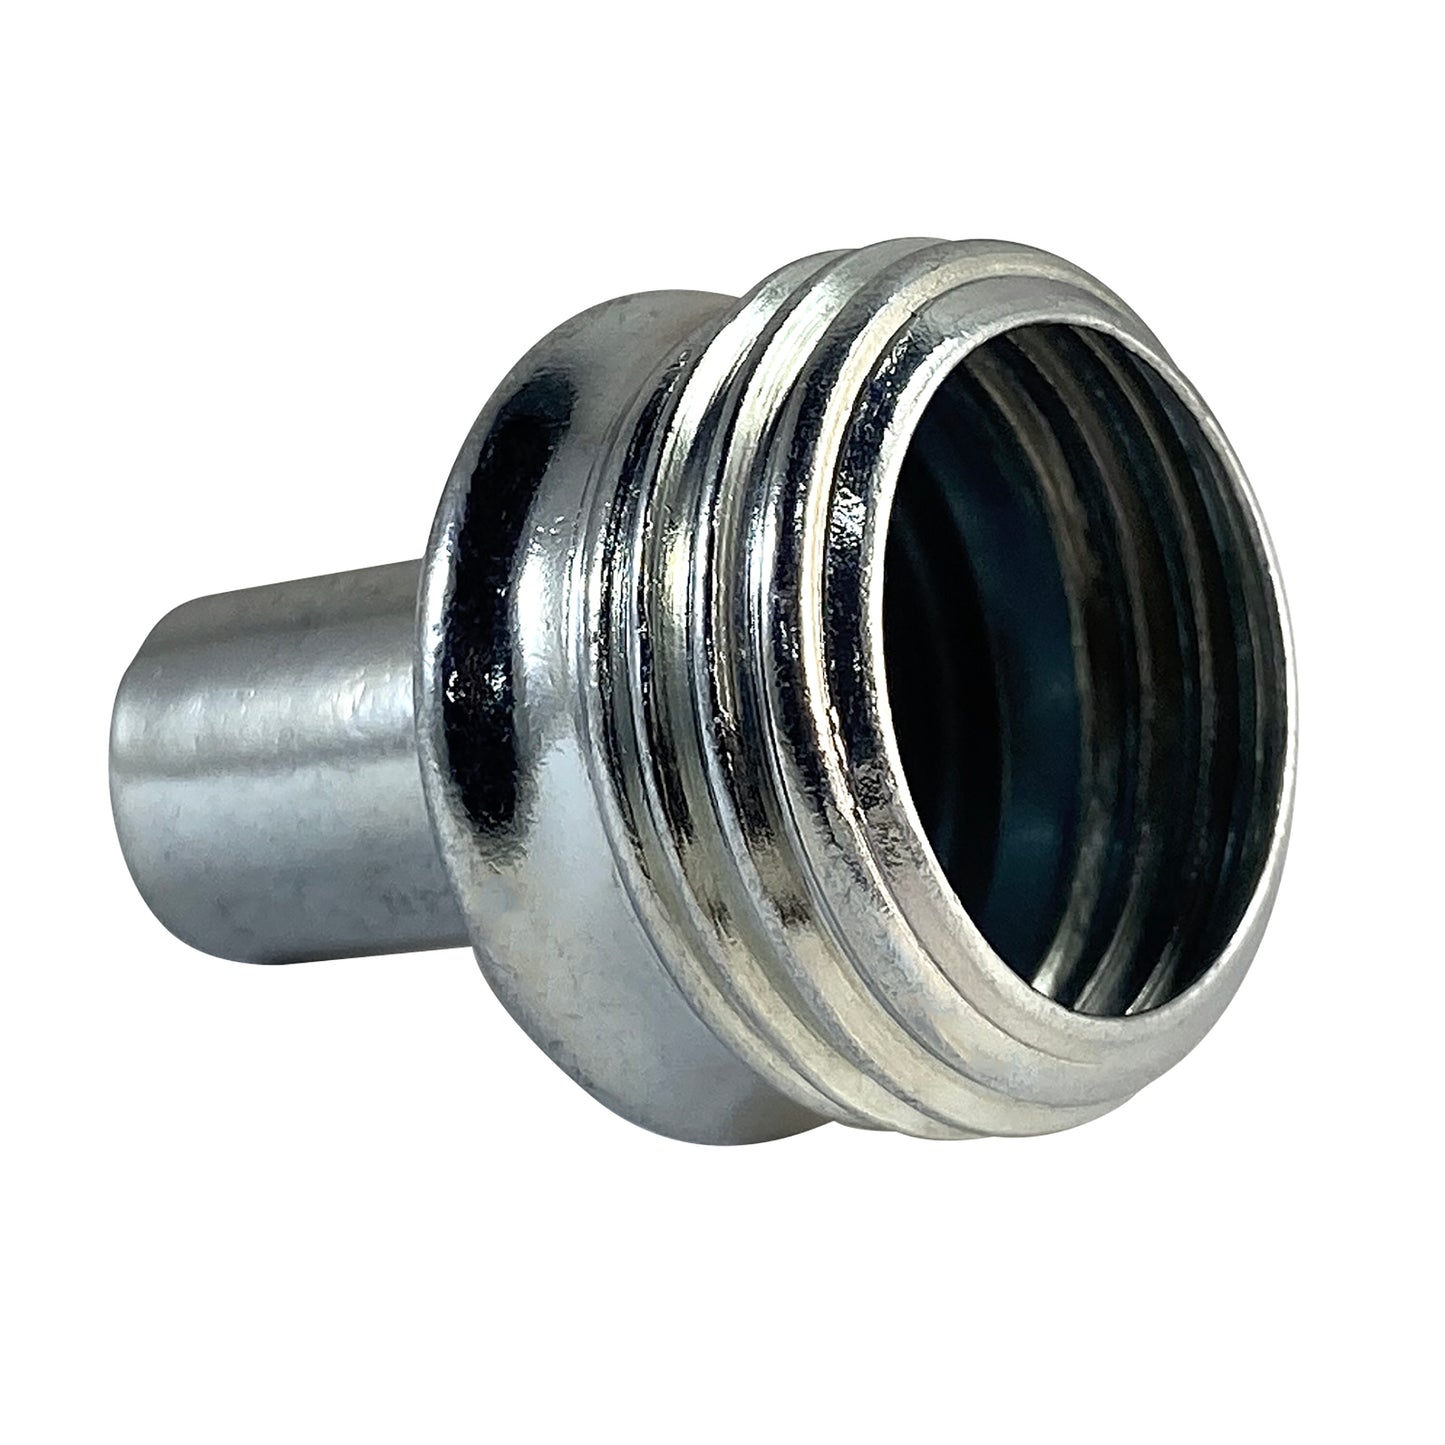 19/32" Expansion Couplings